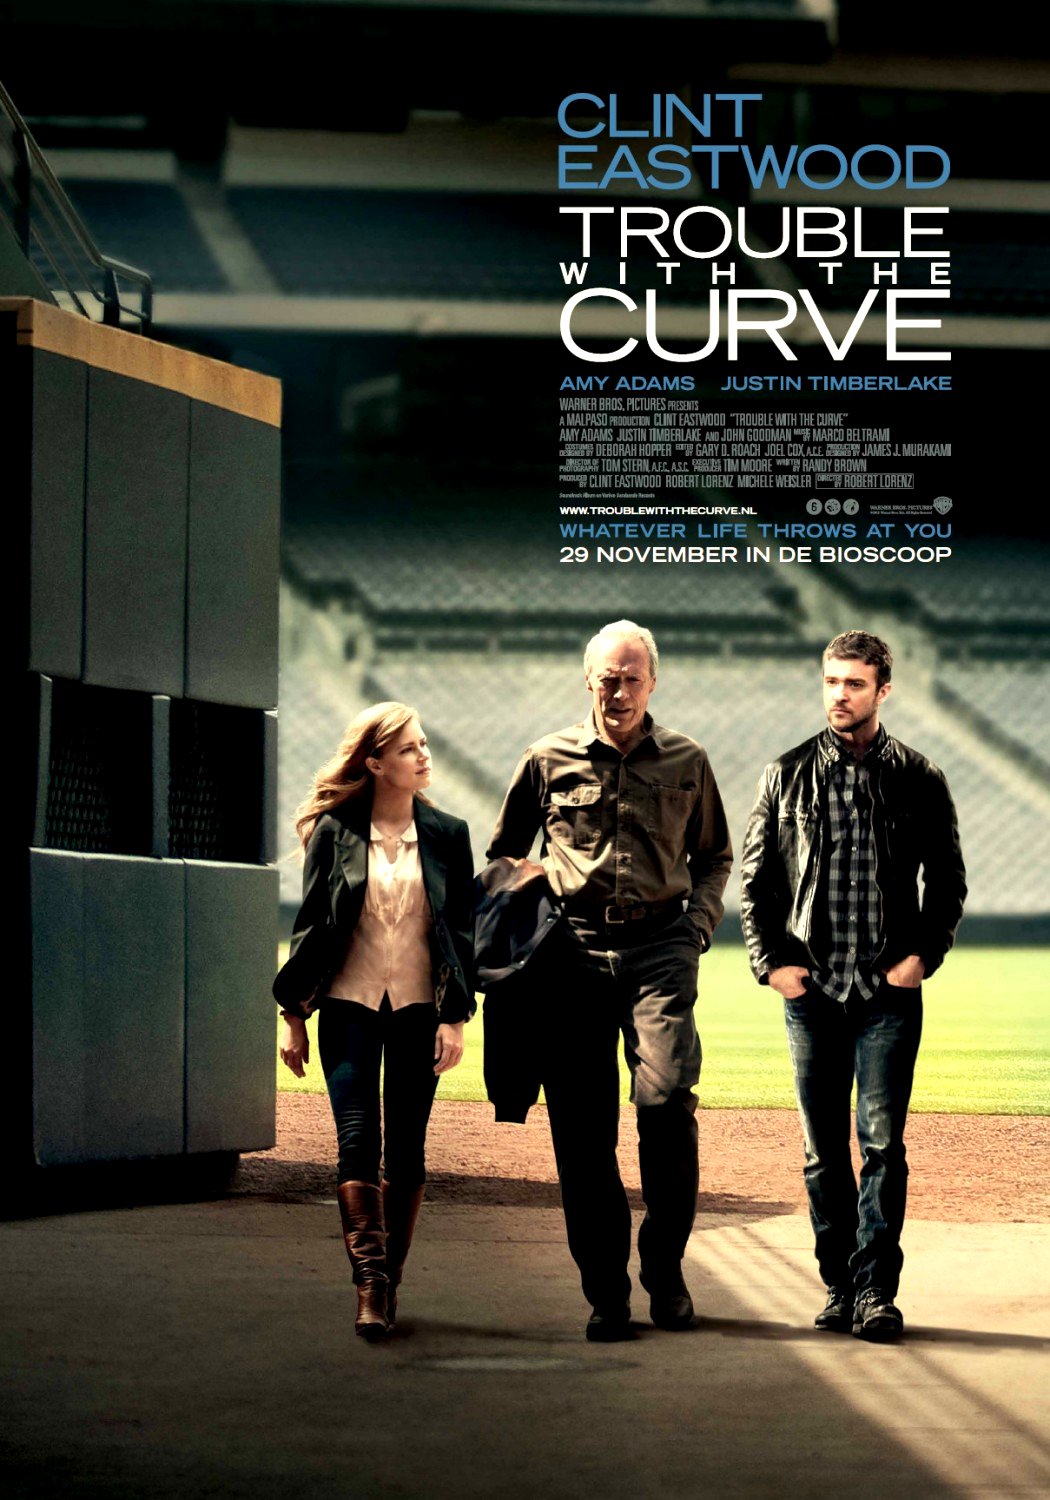 Trouble with the Curve (2012)Movie Poster Google image from http://www.upcoming-movies.com/posters/2012/september/trouble-with-the-curve-movie-poster-3.jpg